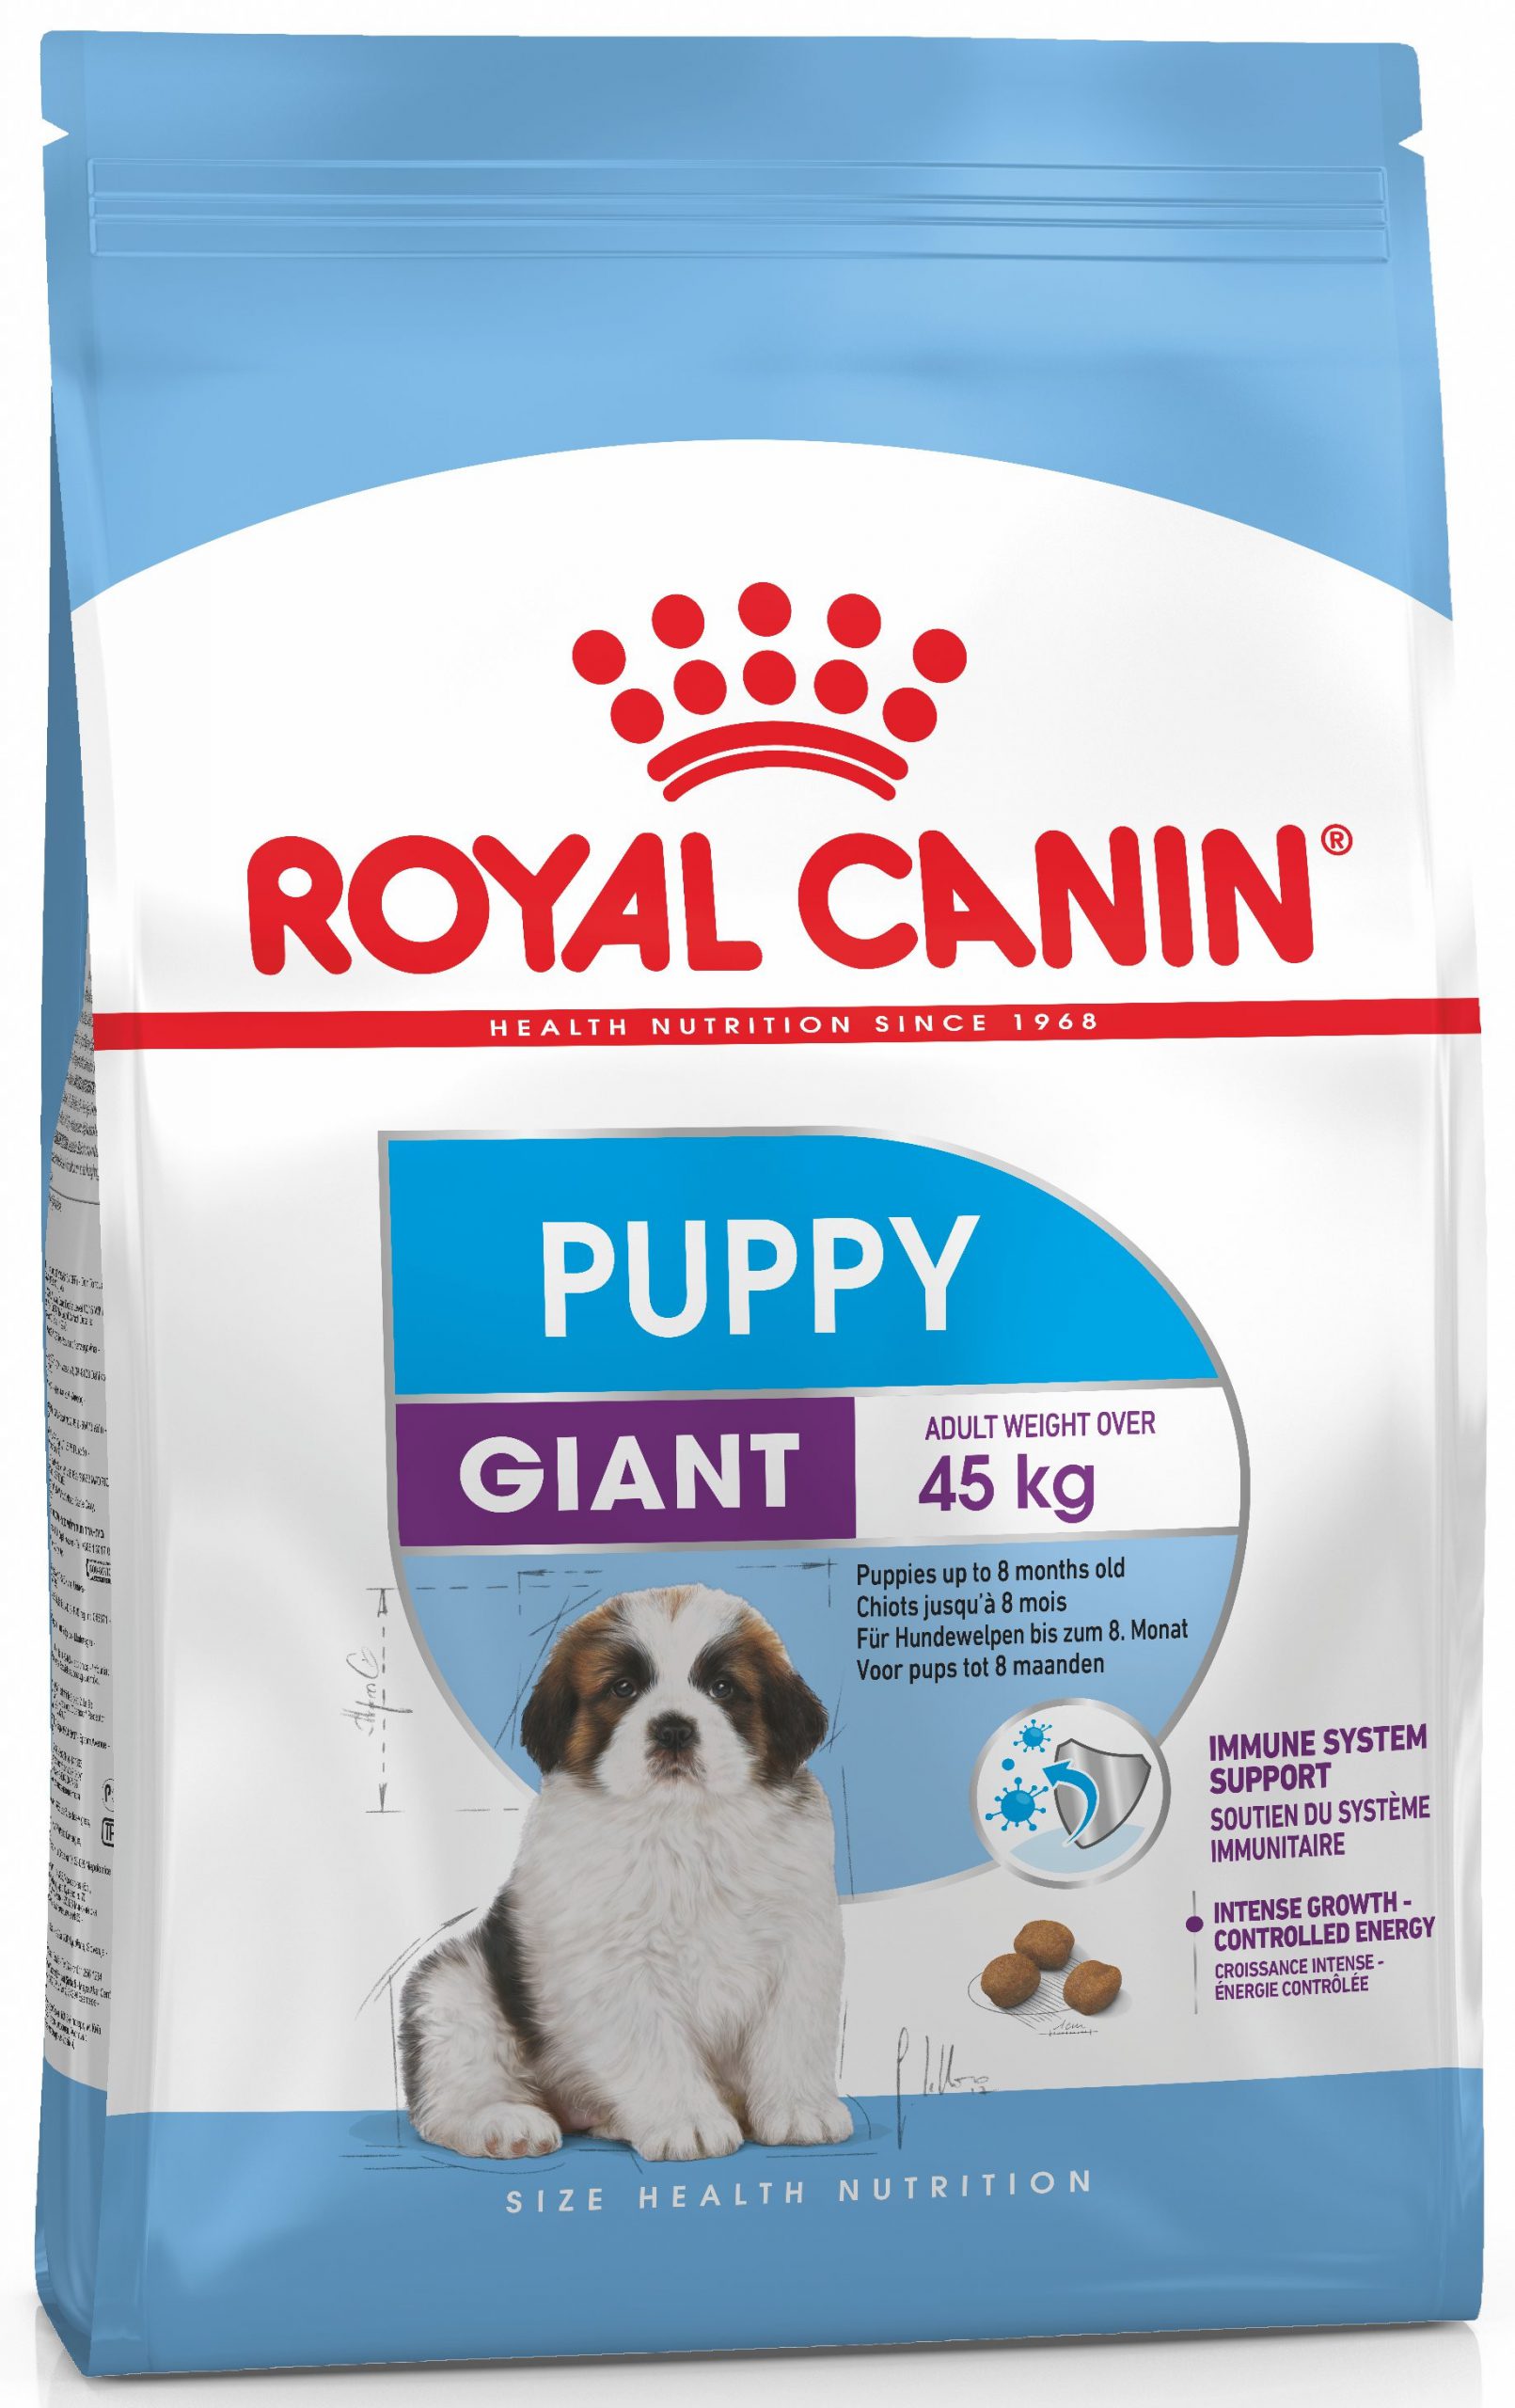 Royal Canin Puppy Giant